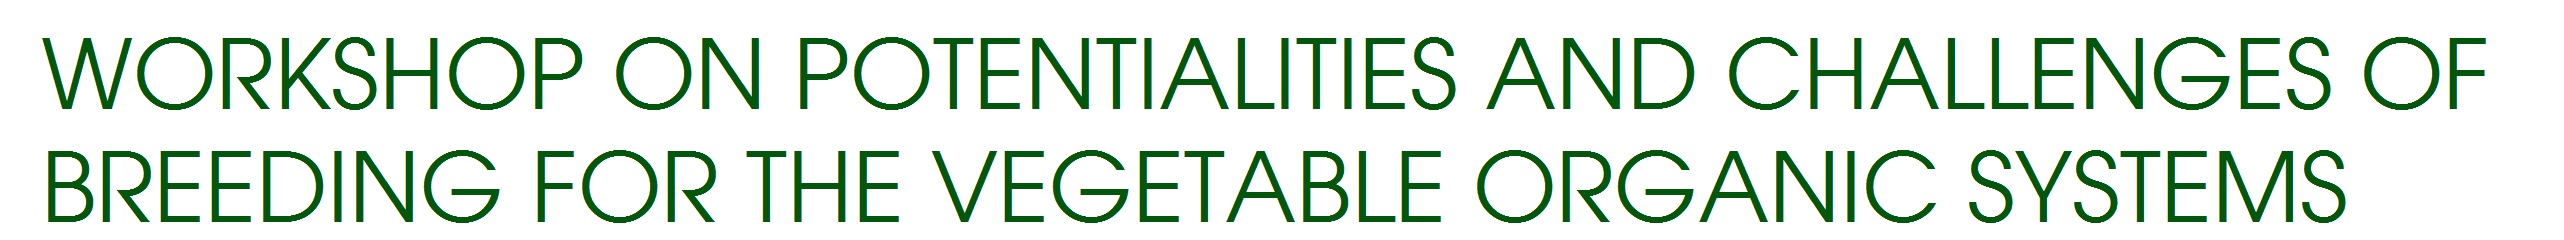 Workshop on Potentialities and challenges of breeding for the vegetable organic systems